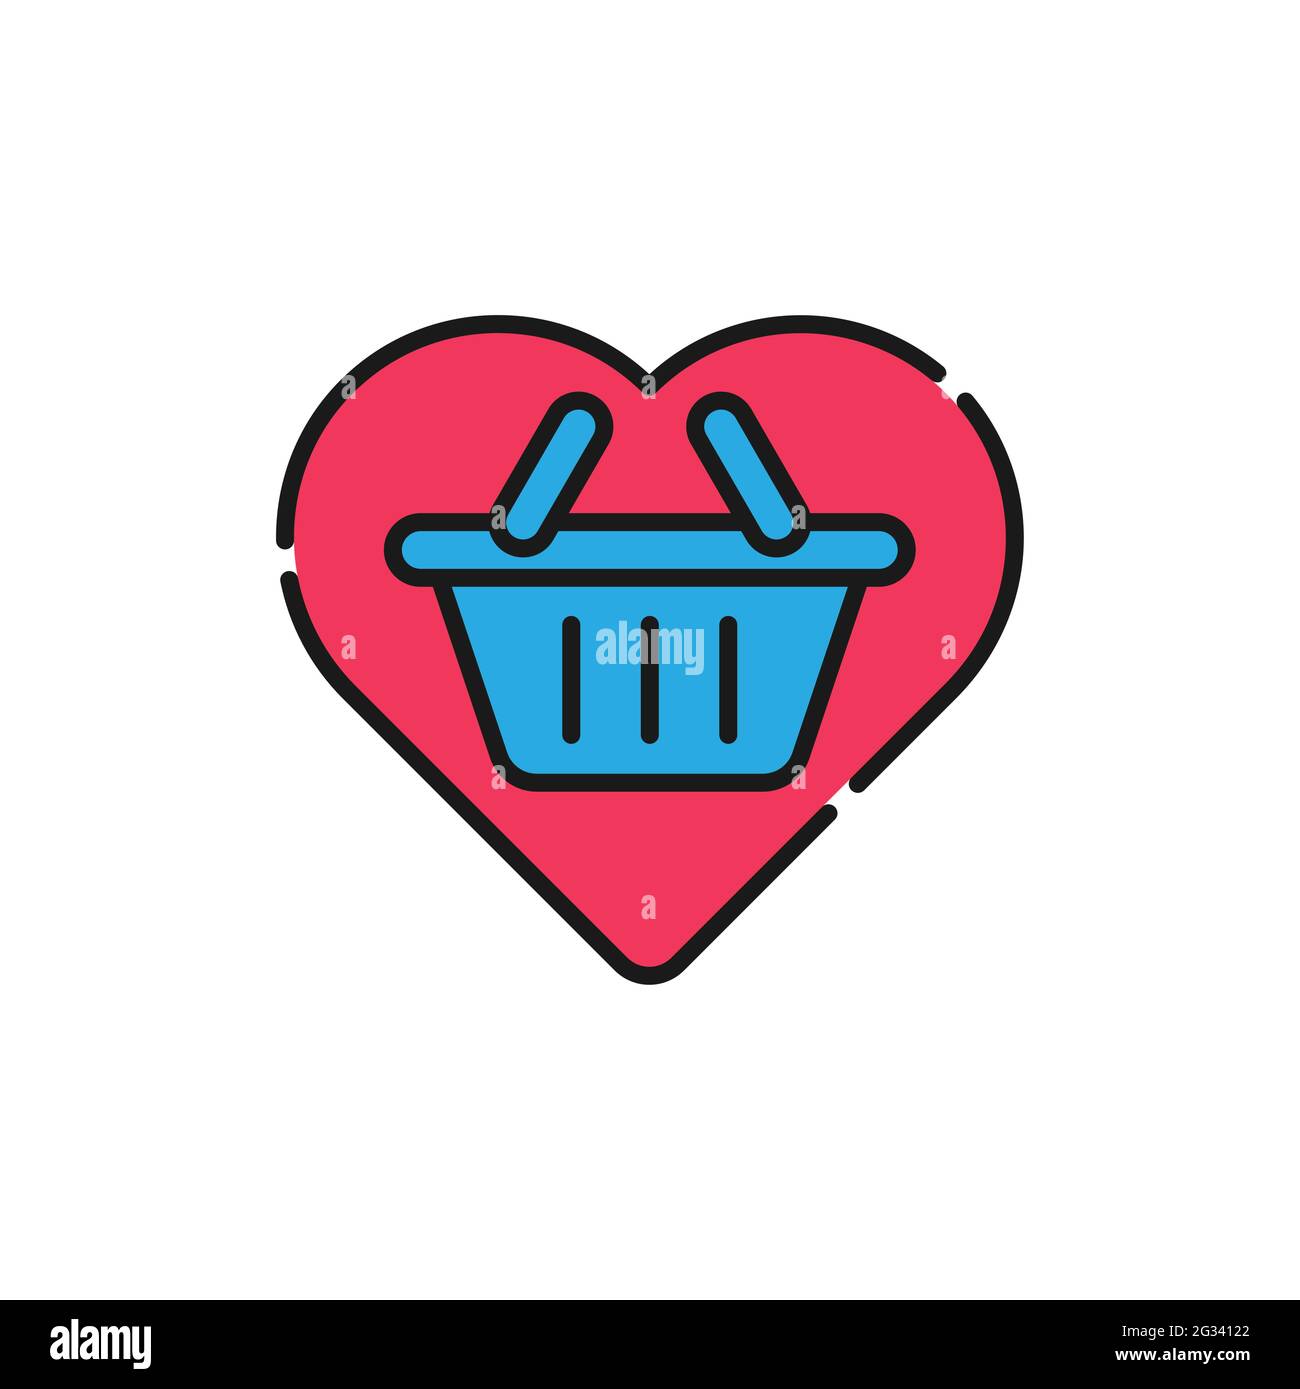 Shopping Wish List icon Vector Illustration. Shopping Wish List with Love Shape icon design concept for e-commerce, online store and marketplace websi Stock Vector